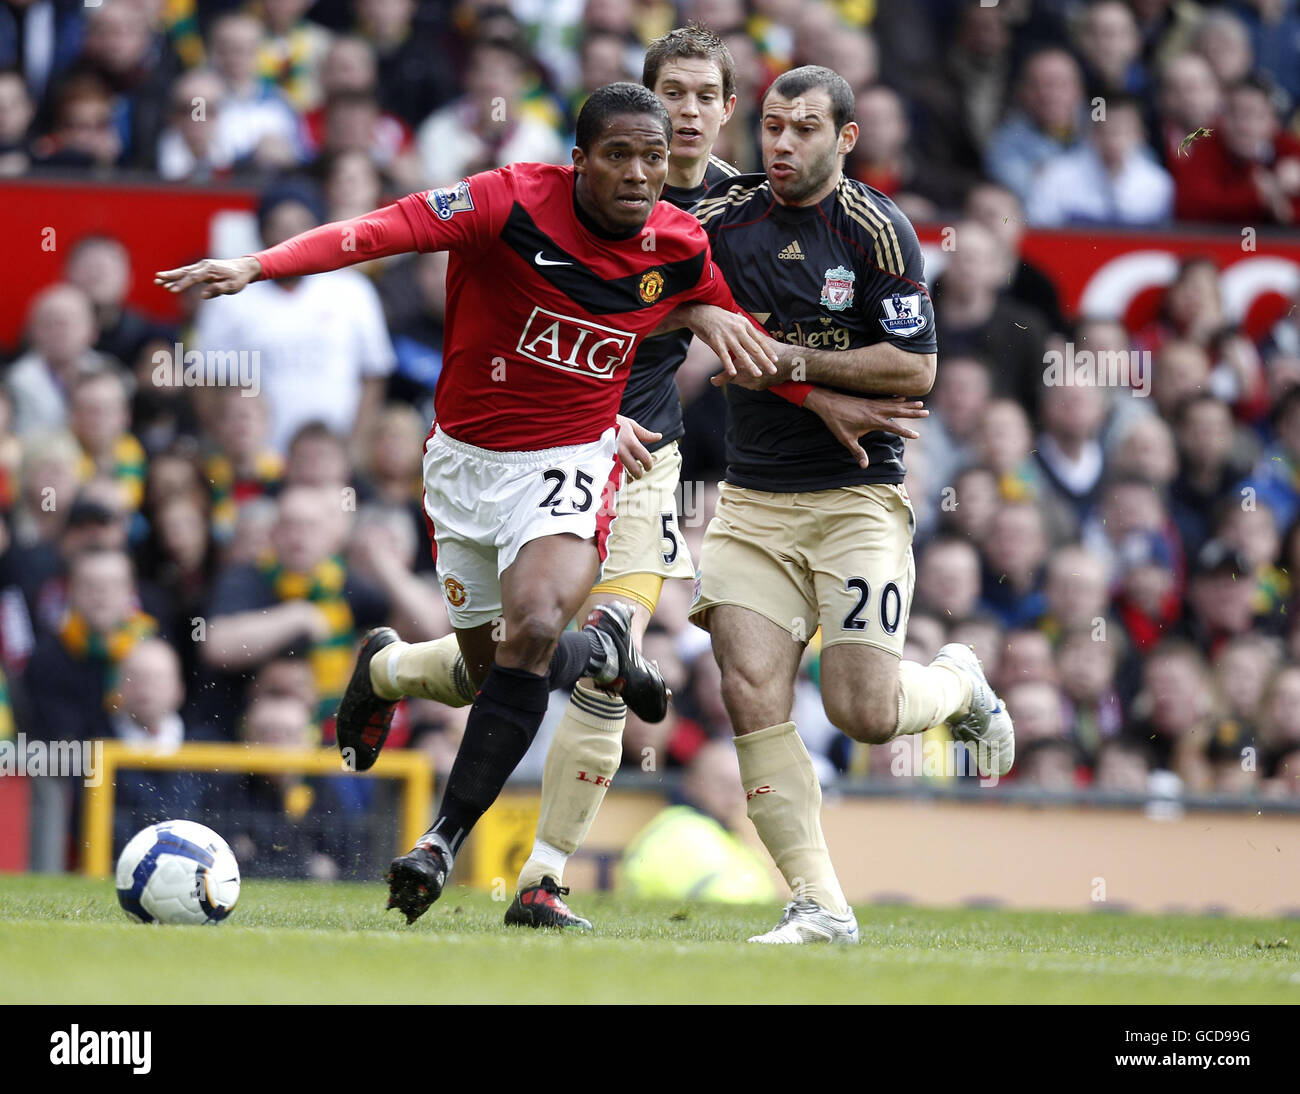 Manchester United's Antonio Valencia (left) and Liverpool's Javier Mascherano in action during the Barclays Premier League match at Old Trafford, Manchester. Stock Photo